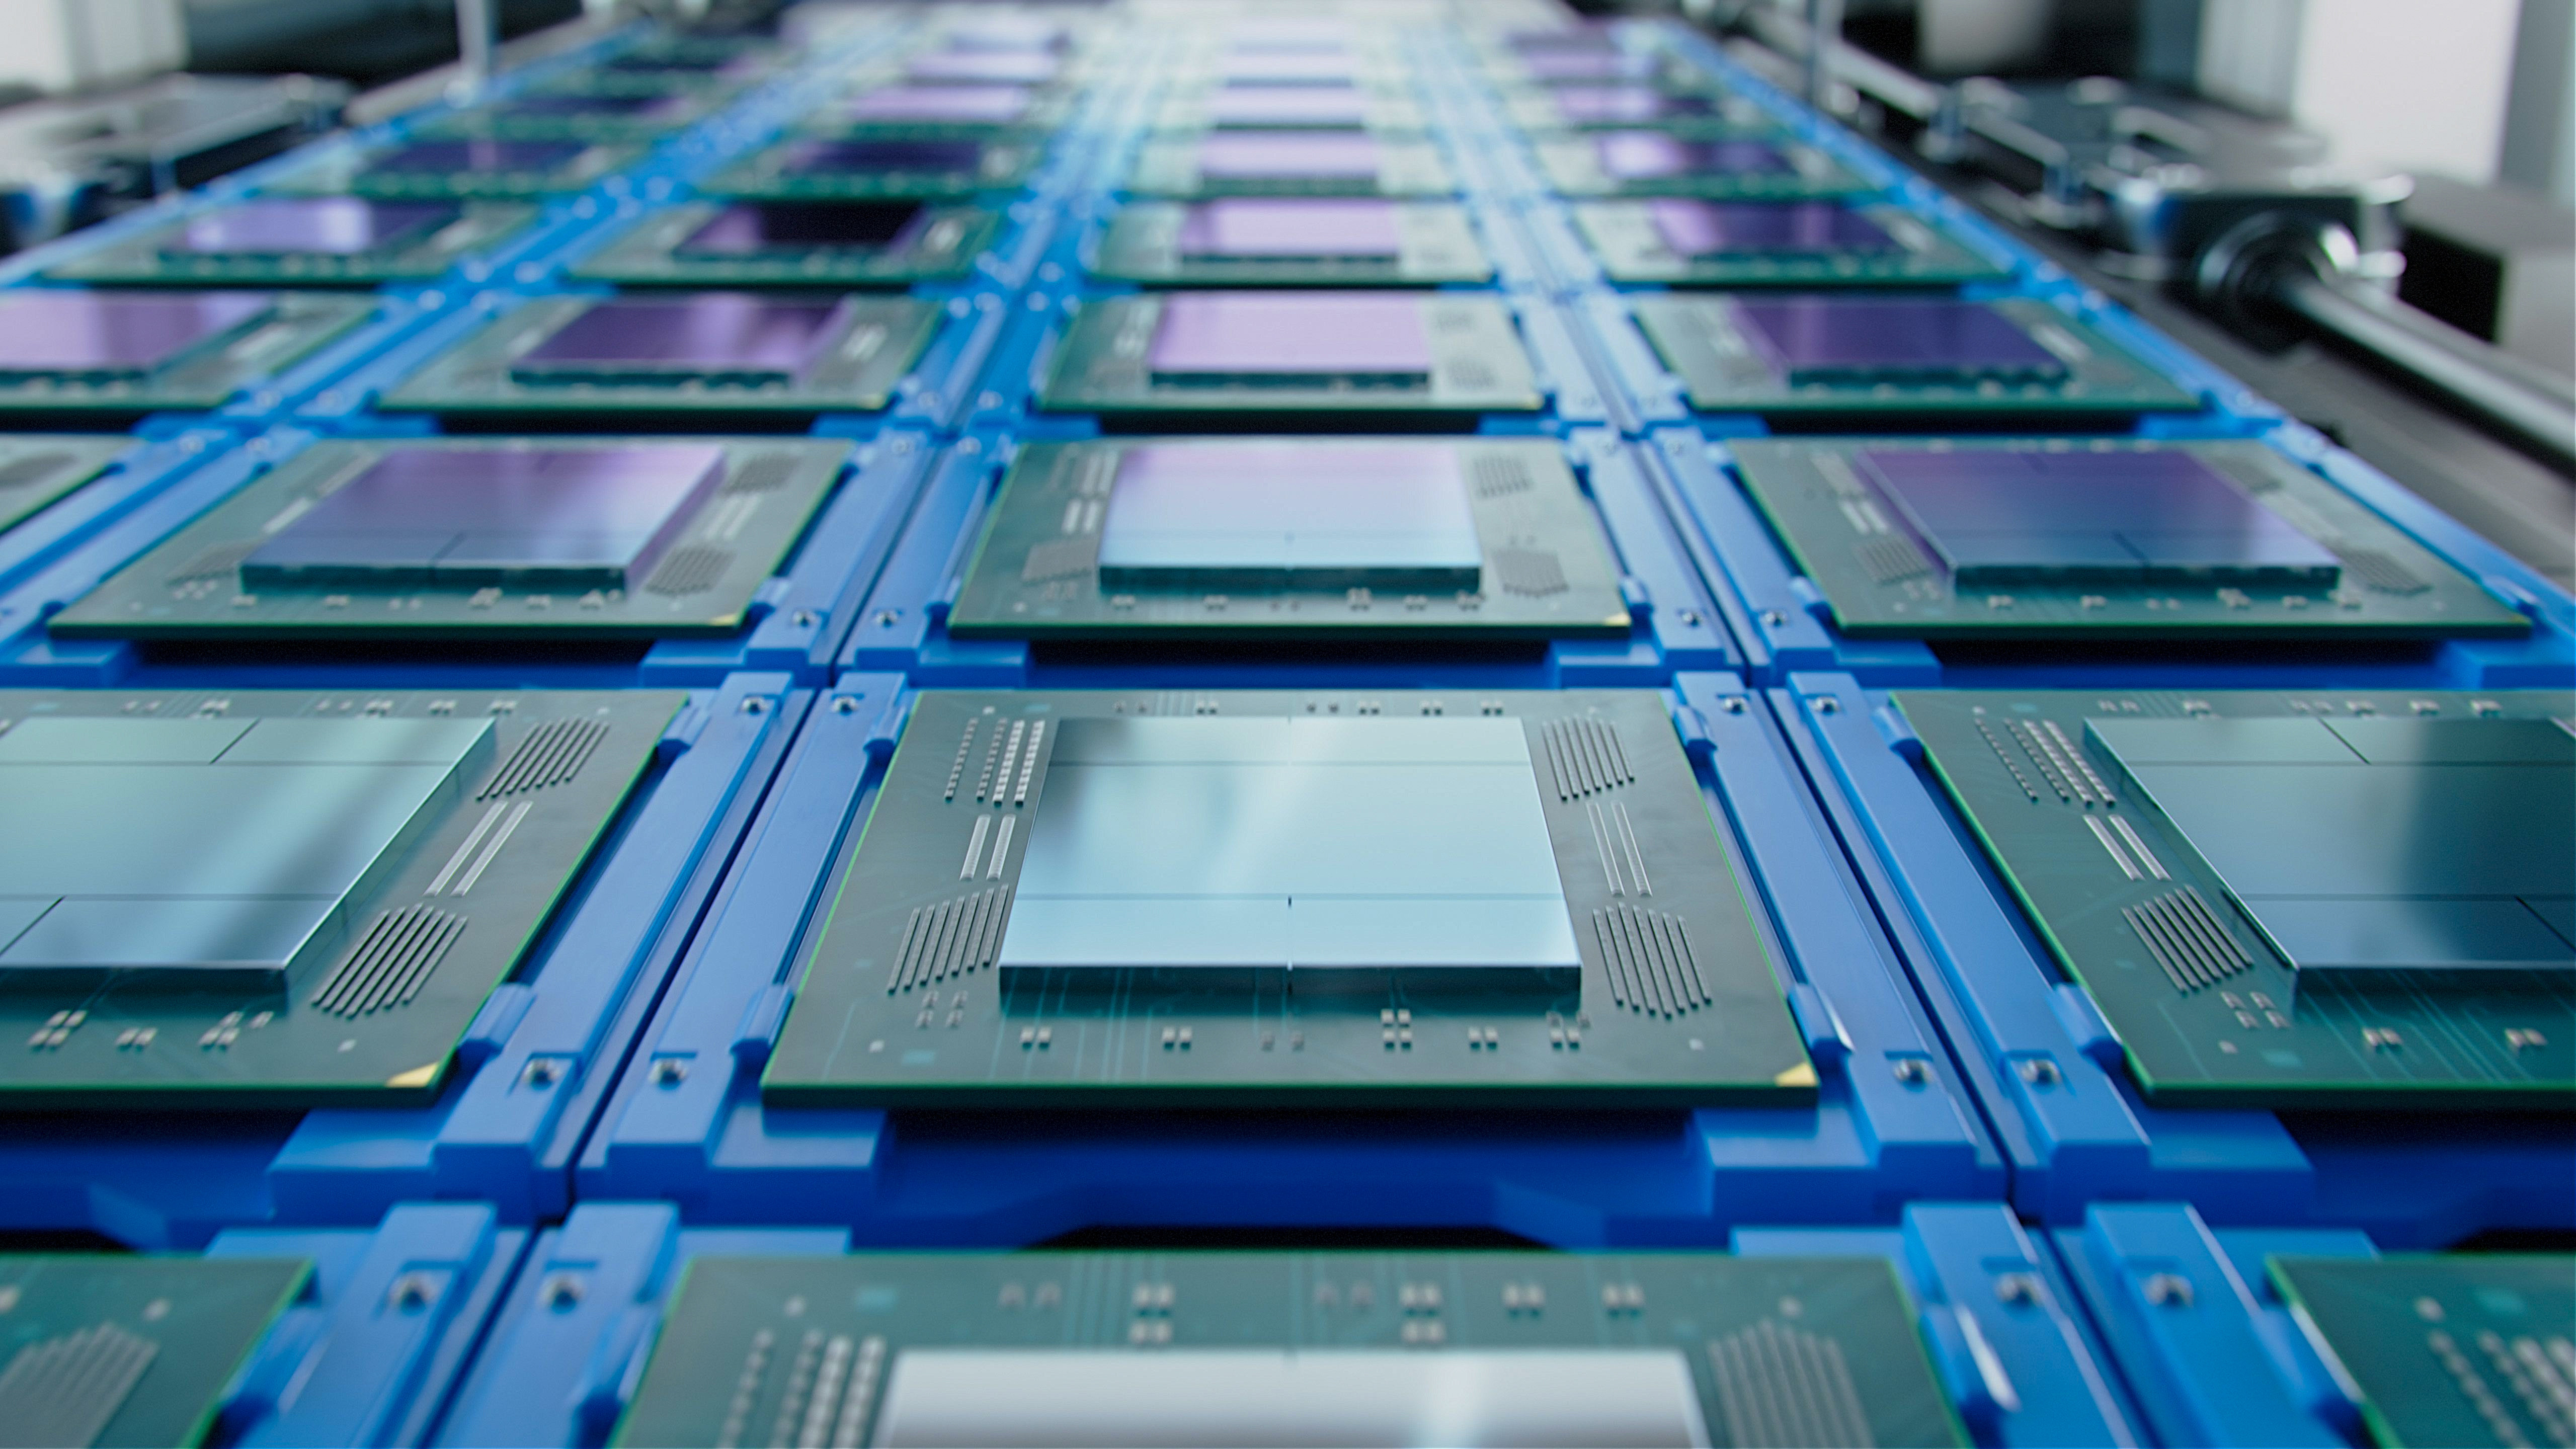 Shot of Computer Processor Production Line at Advanced Semiconductor Foundry in Bright Environment.